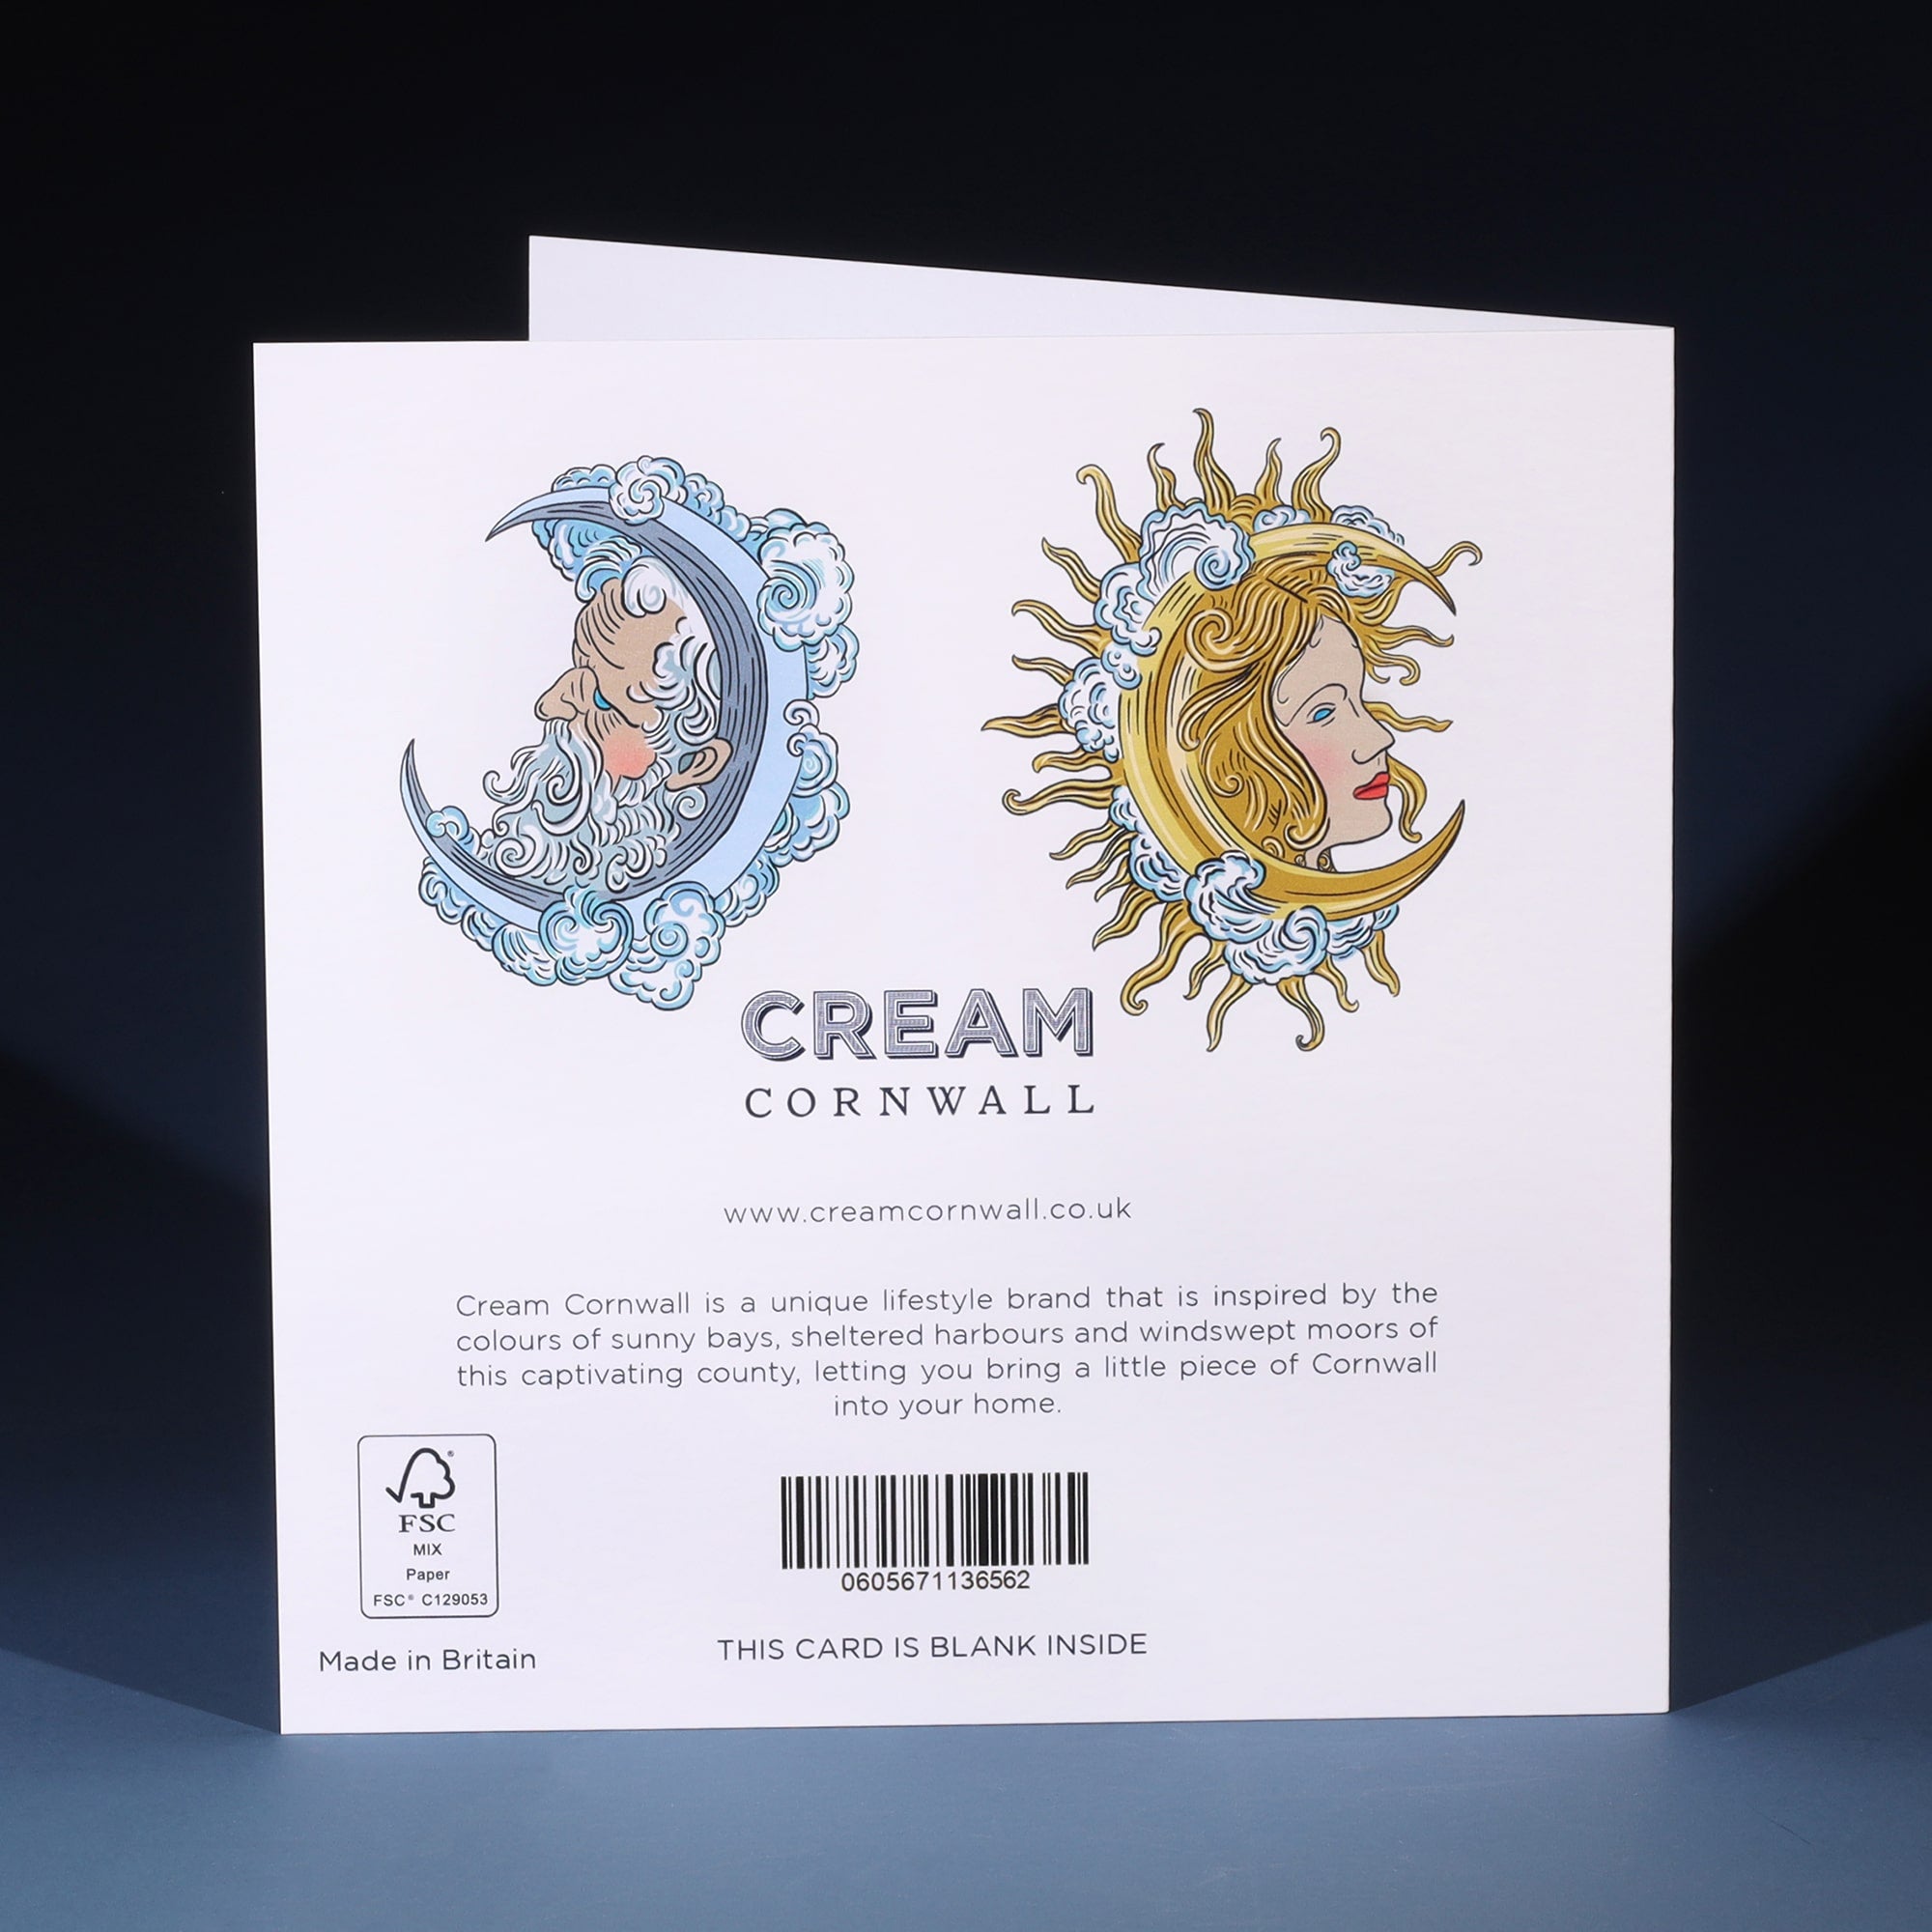 Back of greeting card with details about Cream Cornwall & a sun and moon illustration.